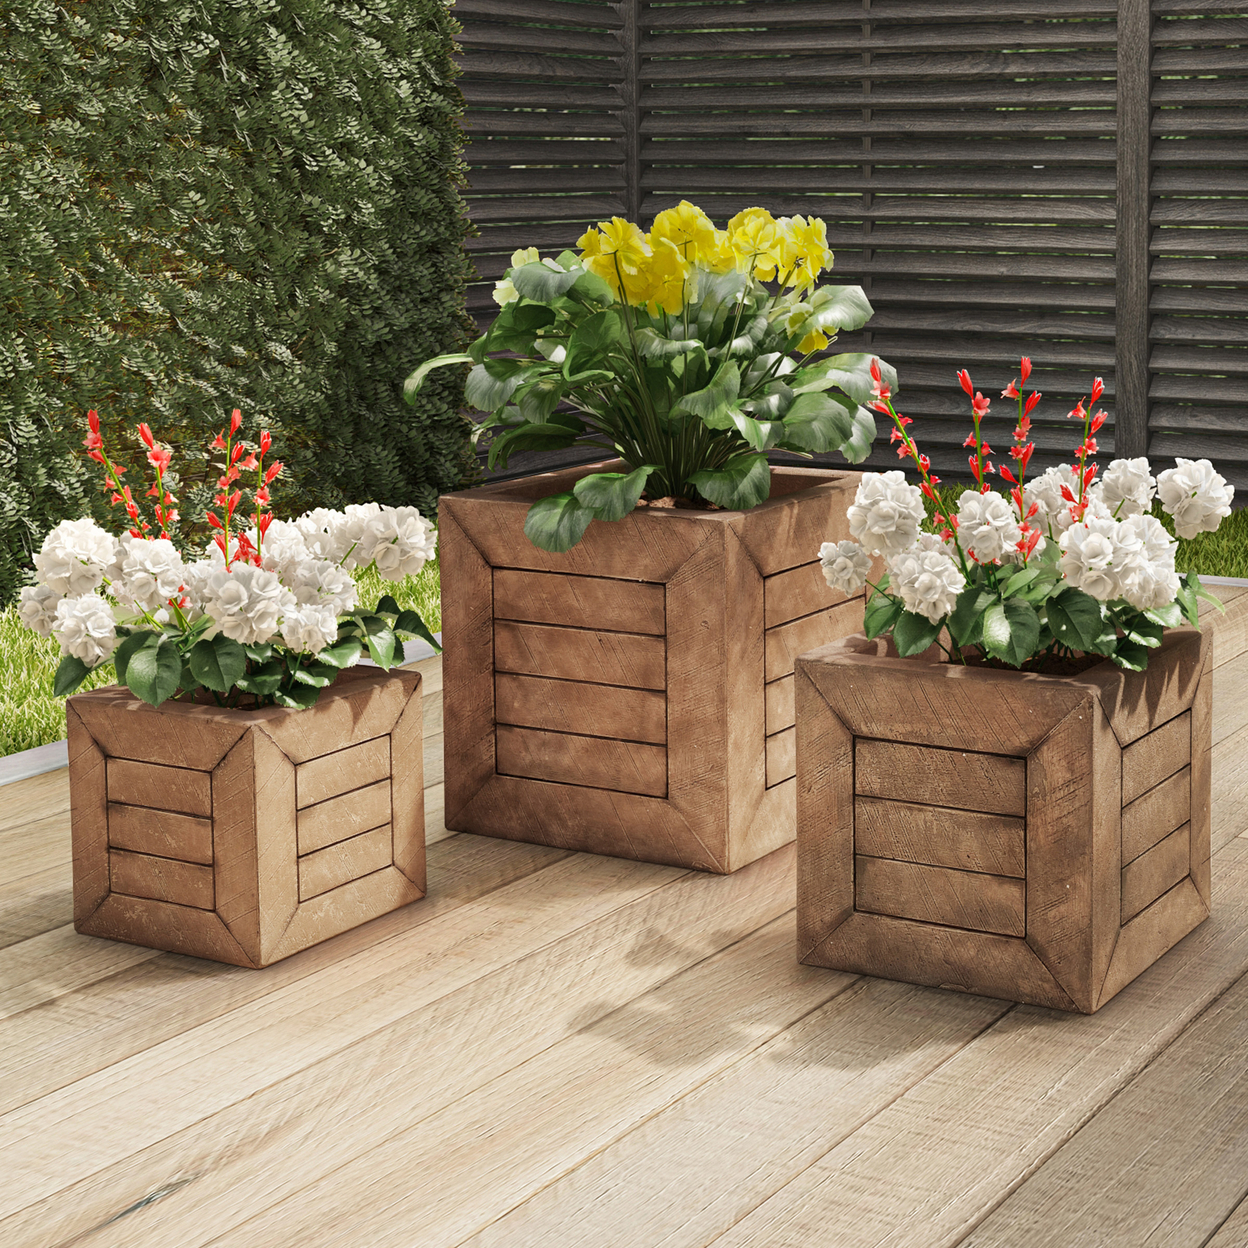 Square Fiber Clay Planter Set 3-Piece Varying Height Rustic Wood Look